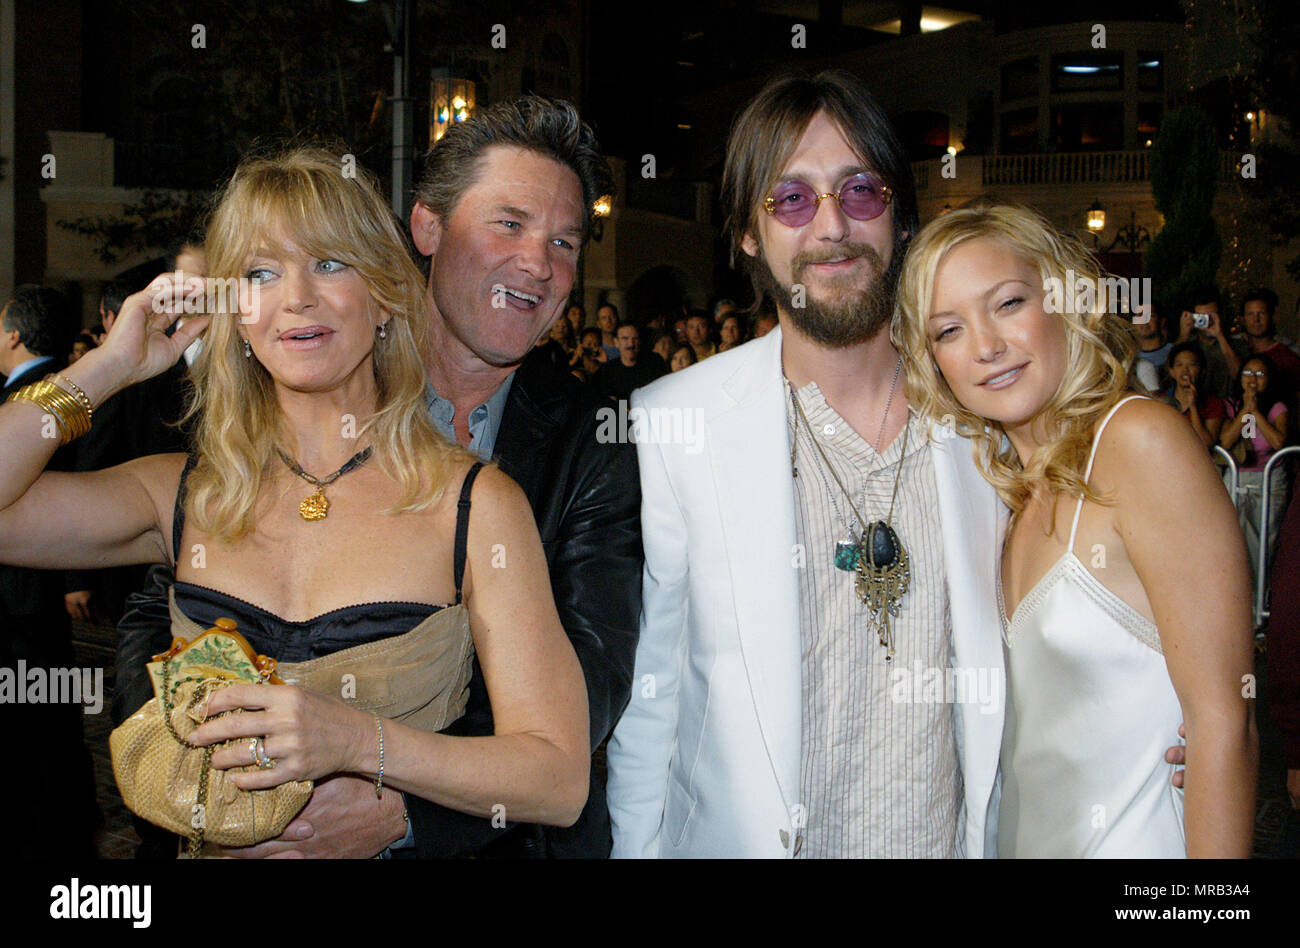 Goldie Hawn and hubby Kurt Russell posing with daughter Kate Hudson and husband Chris Robinson at the premiere of Banger Sisters at the new complex mall and theatre the Groves in Los Angeles. September 19, 2002. Red Carpet Event, Vertical, USA, Film Industry, Celebrities,  Photography, Bestof, Arts Culture and Entertainment, Topix Celebrities fashion , Best of, Event in Hollywood Life - California,  Red Carpet, USA, Film Industry, Celebrities,  movie celebrities, TV celebrities, Music celebrities, Photography,  Arts Culture and Entertainment,   , inquiry tsuni@Gamma-USA.com , vertical, several Stock Photo